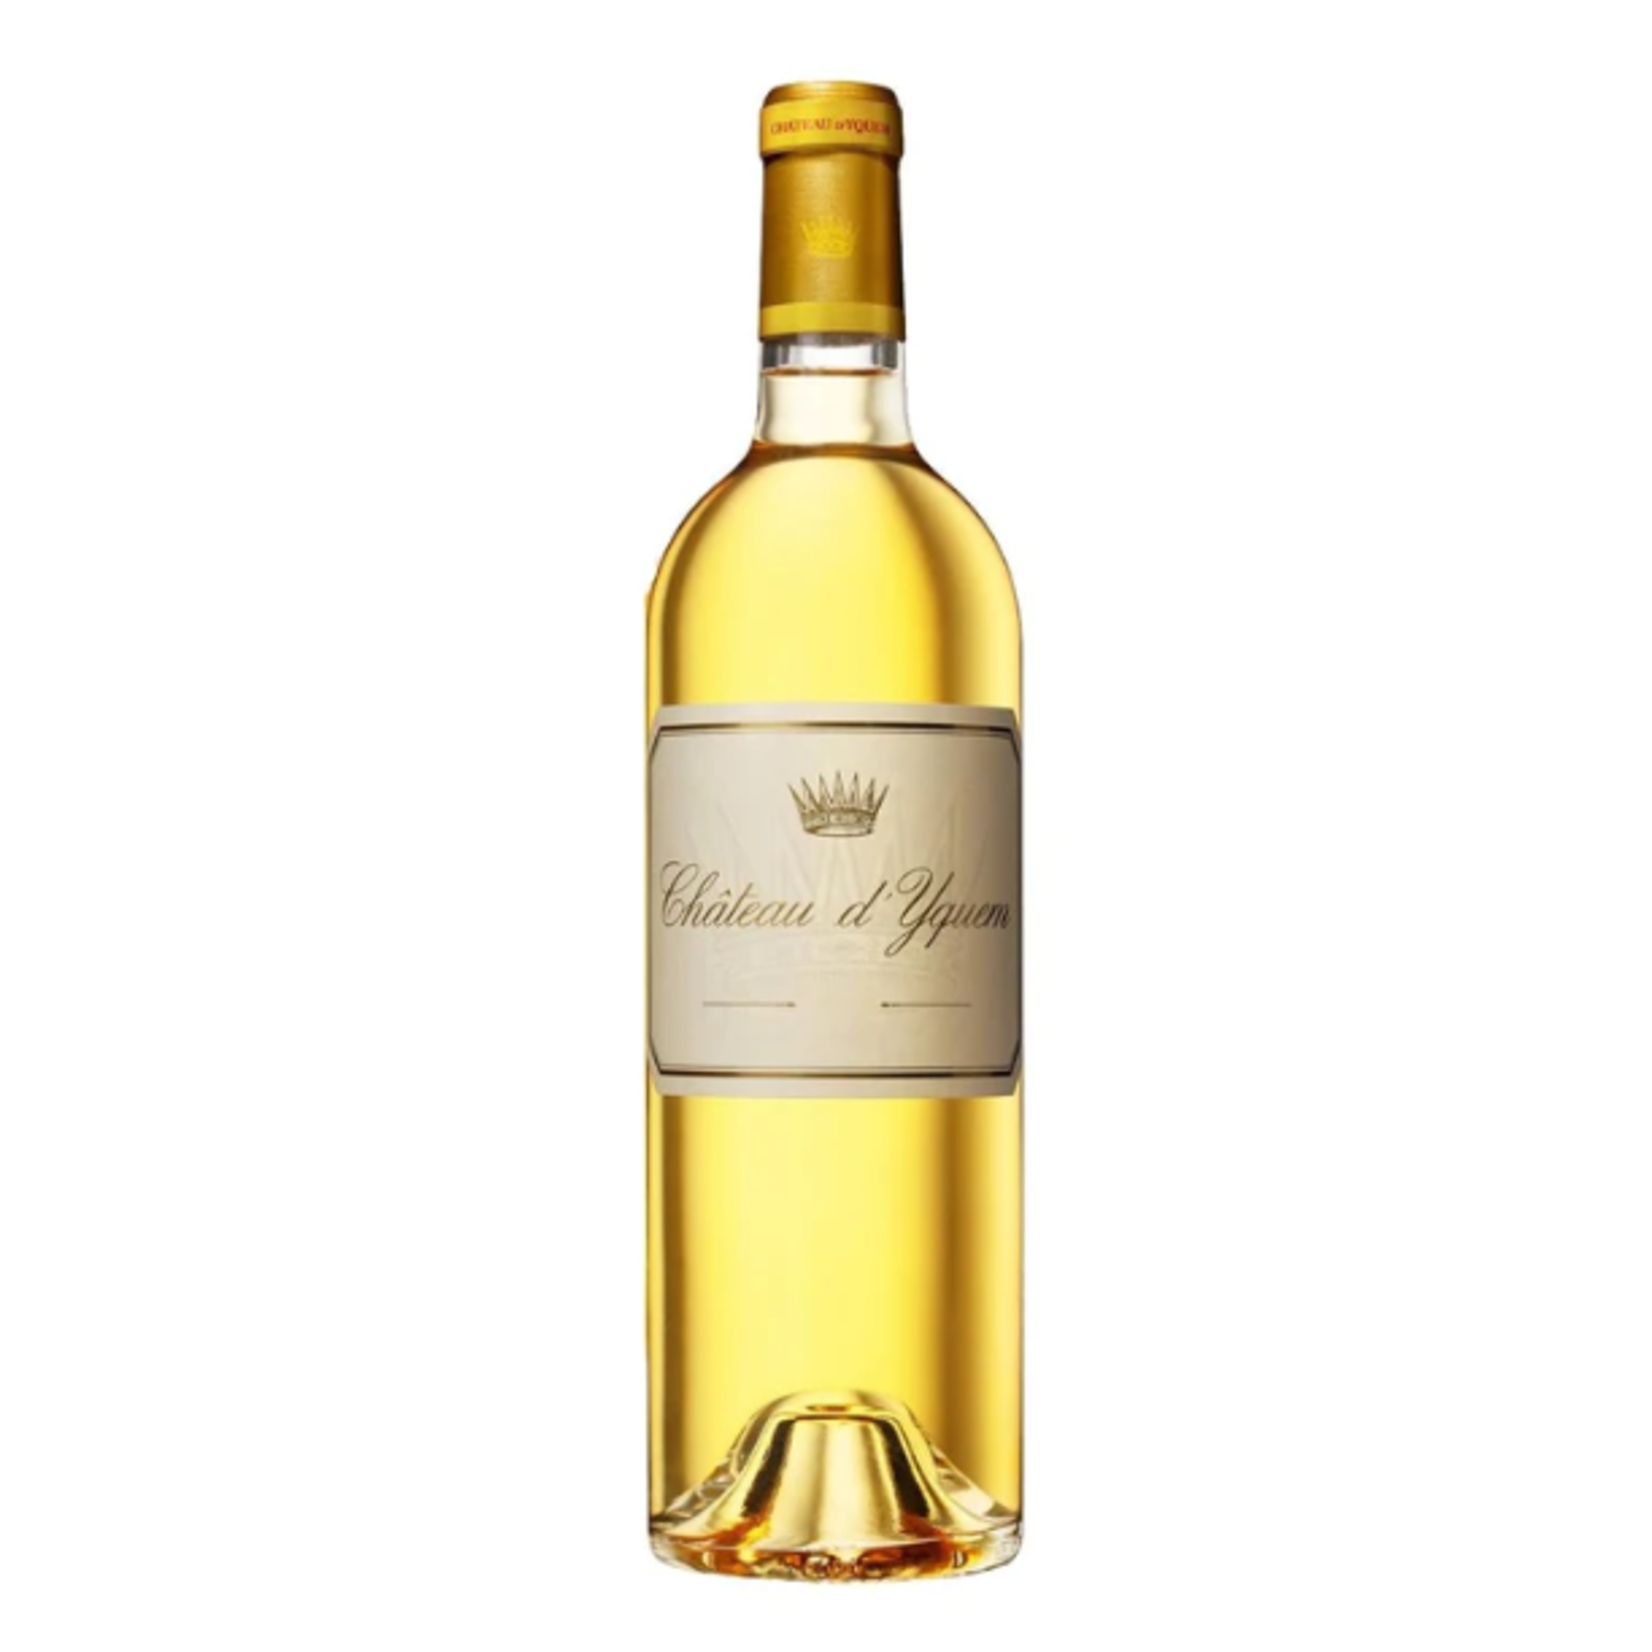 Wine Trust Chateau d'Yquem 375 ml, France